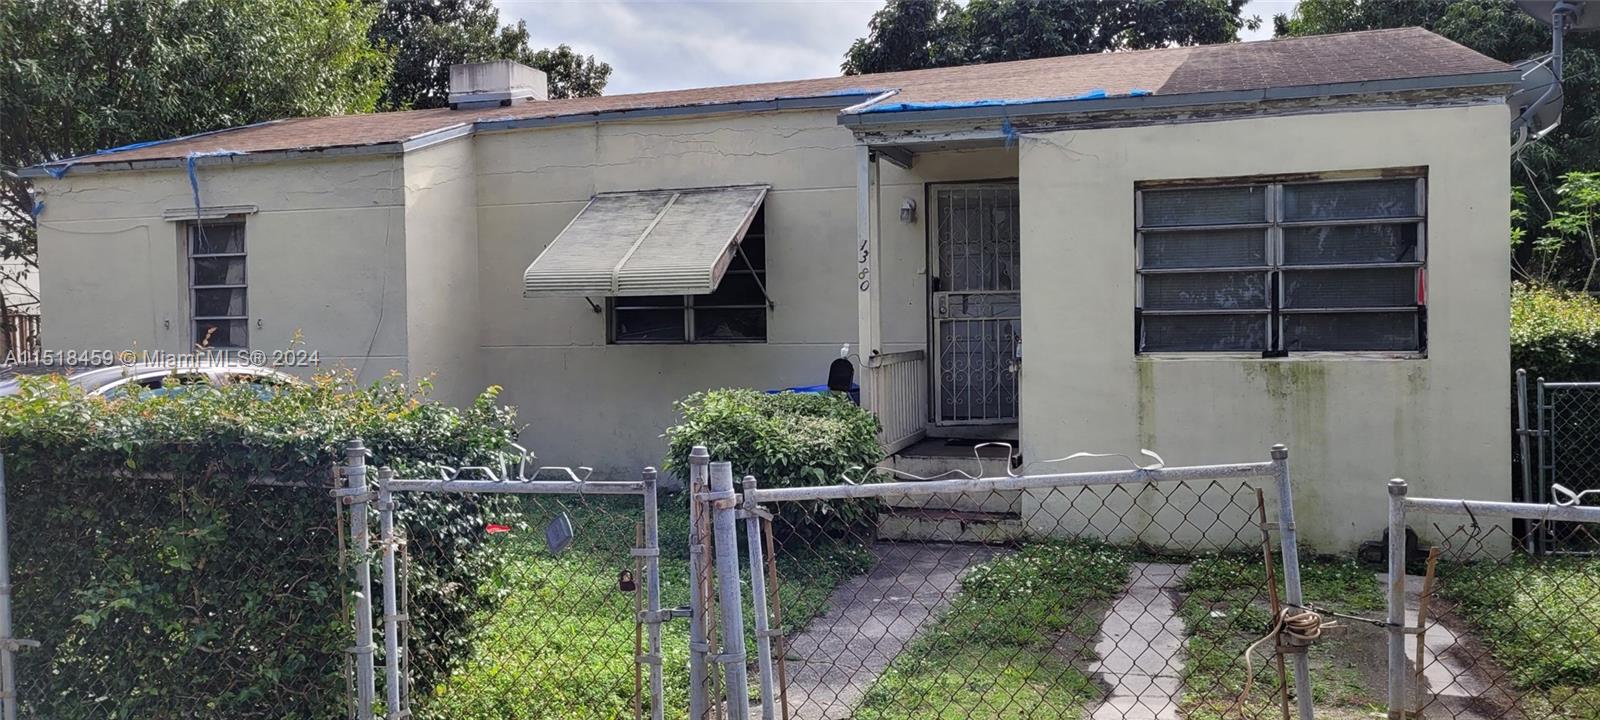 1380 NW 39th St, Miami, Florida 33142, 3 Bedrooms Bedrooms, 2 Rooms Rooms,2 BathroomsBathrooms,Residential,For Sale,1380 NW 39th St,A11518459